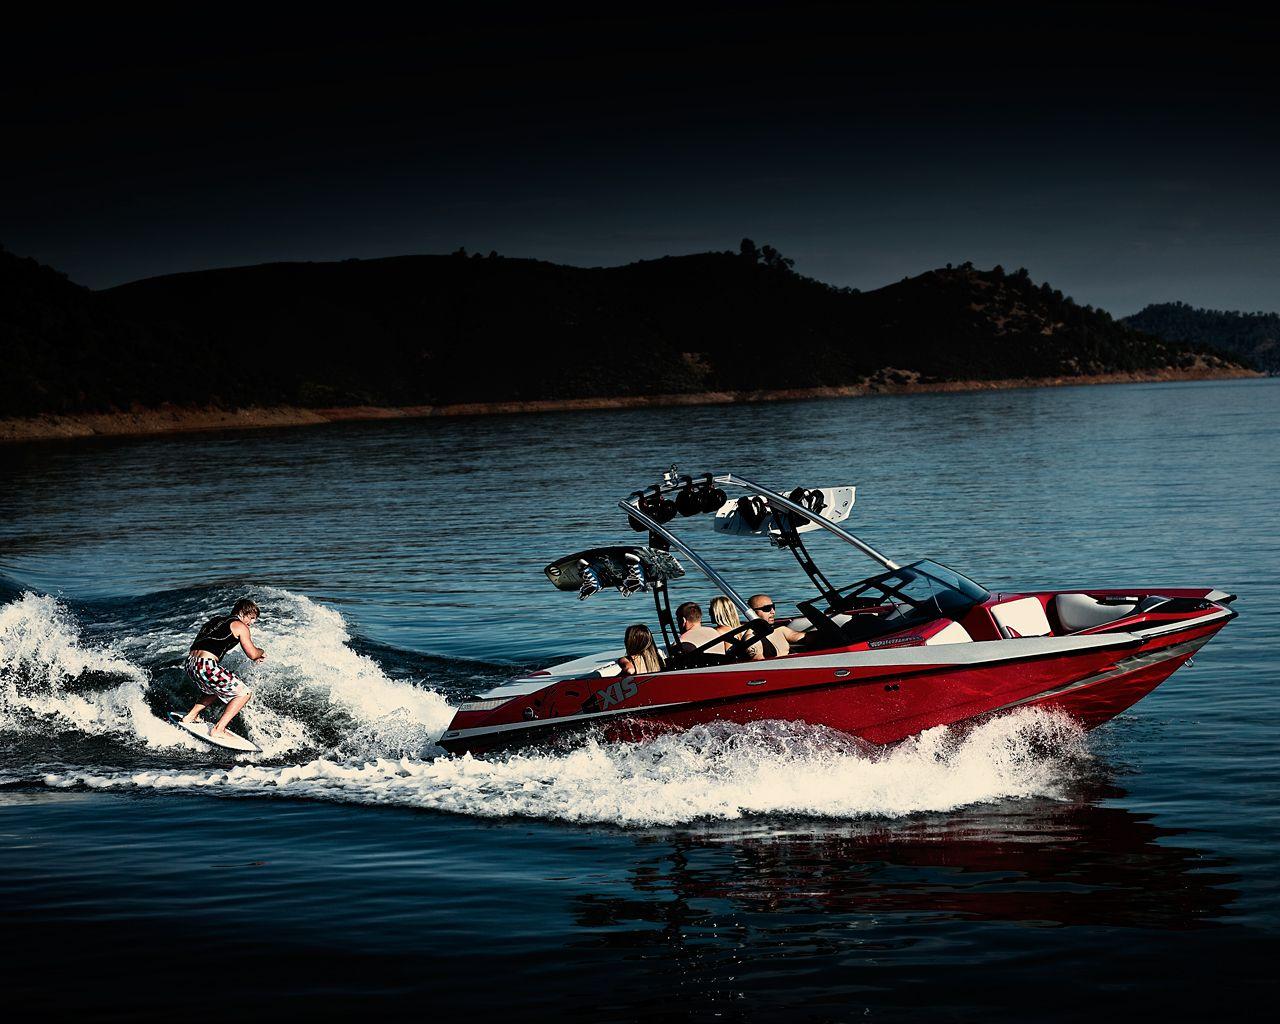 Axis Boats. Wakeboard Boat Wallpaper. Boat Buyers Guide 2010